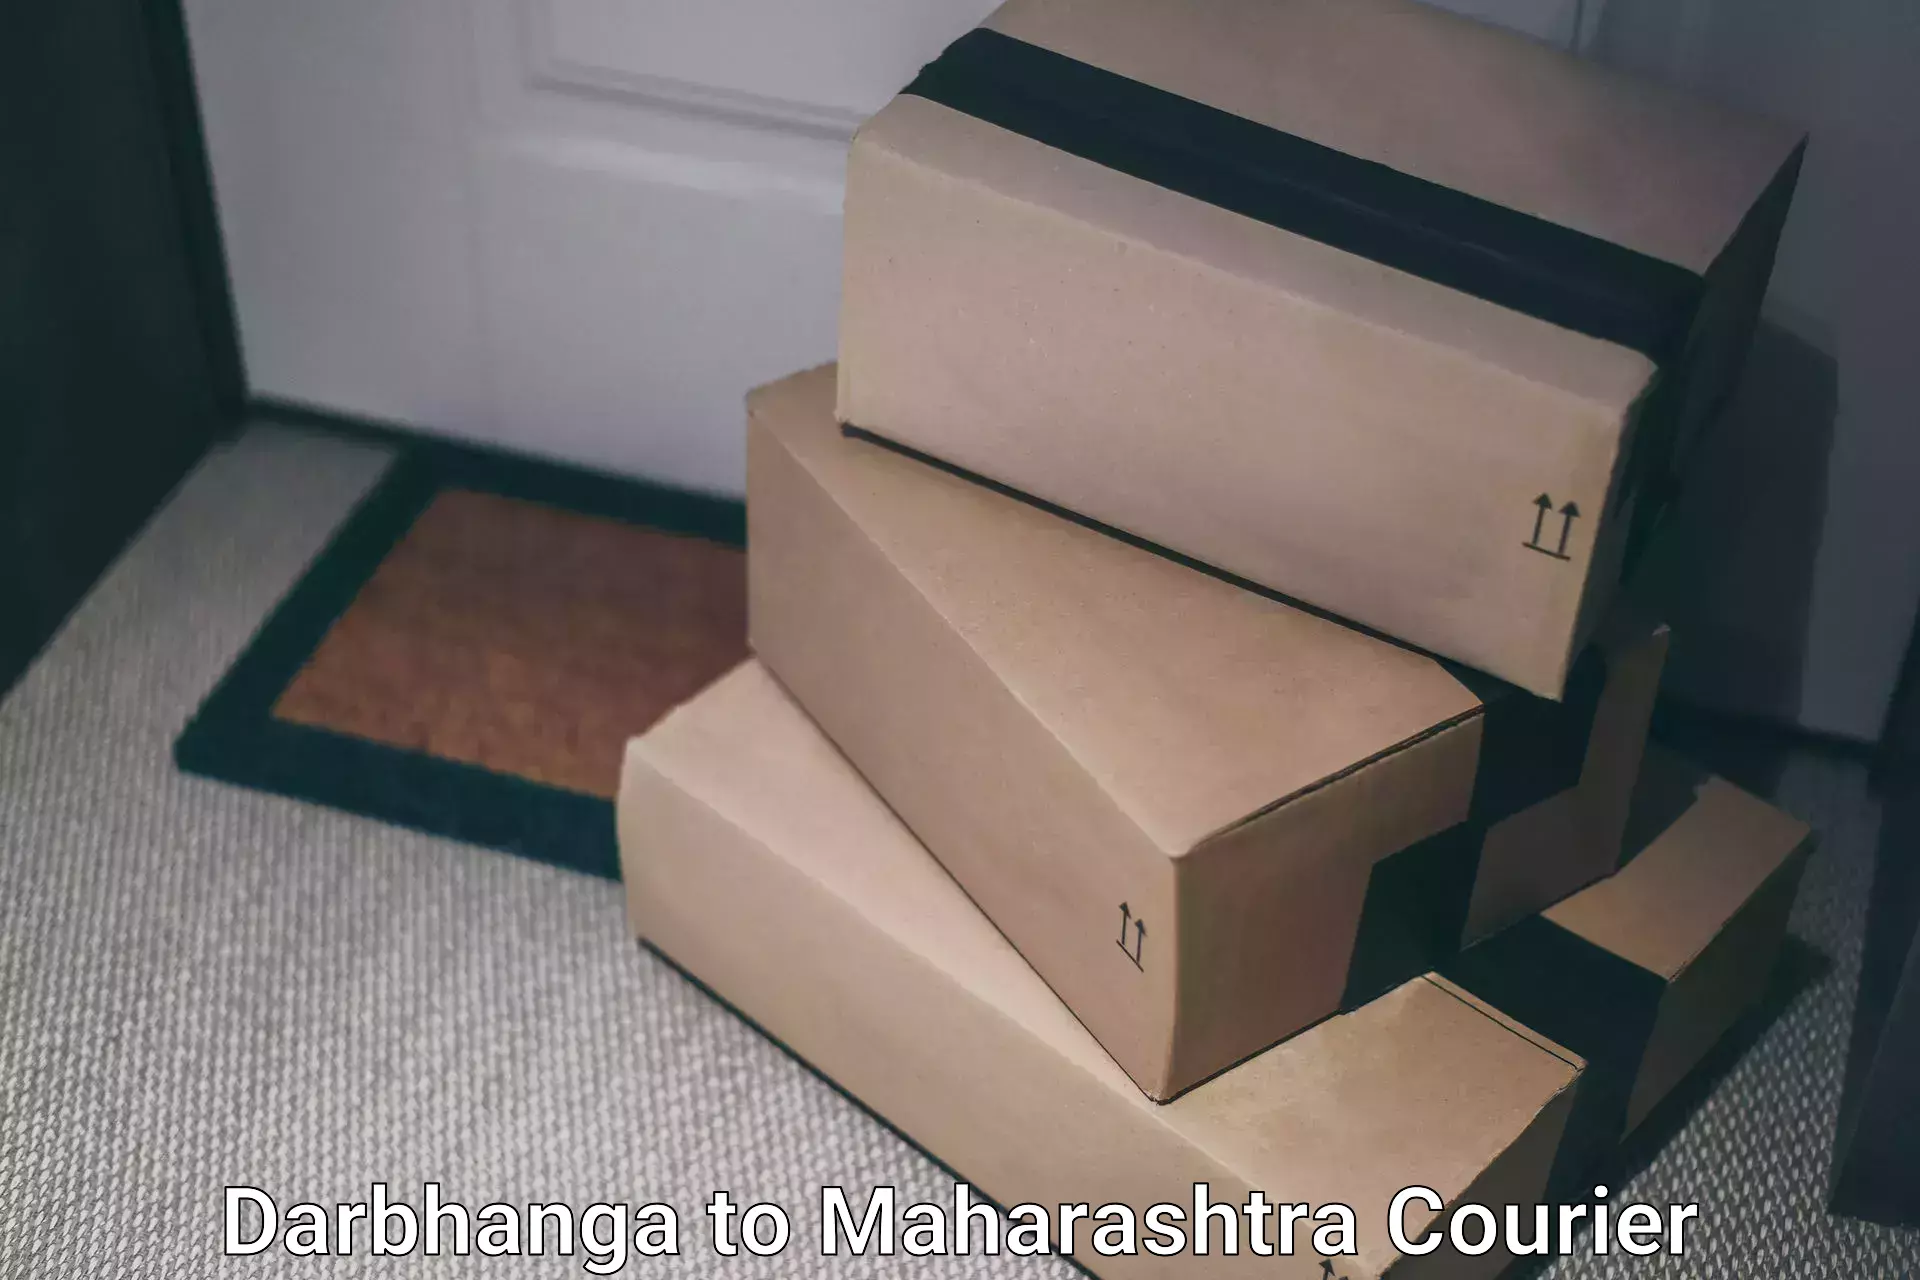 Courier service efficiency Darbhanga to Dhule